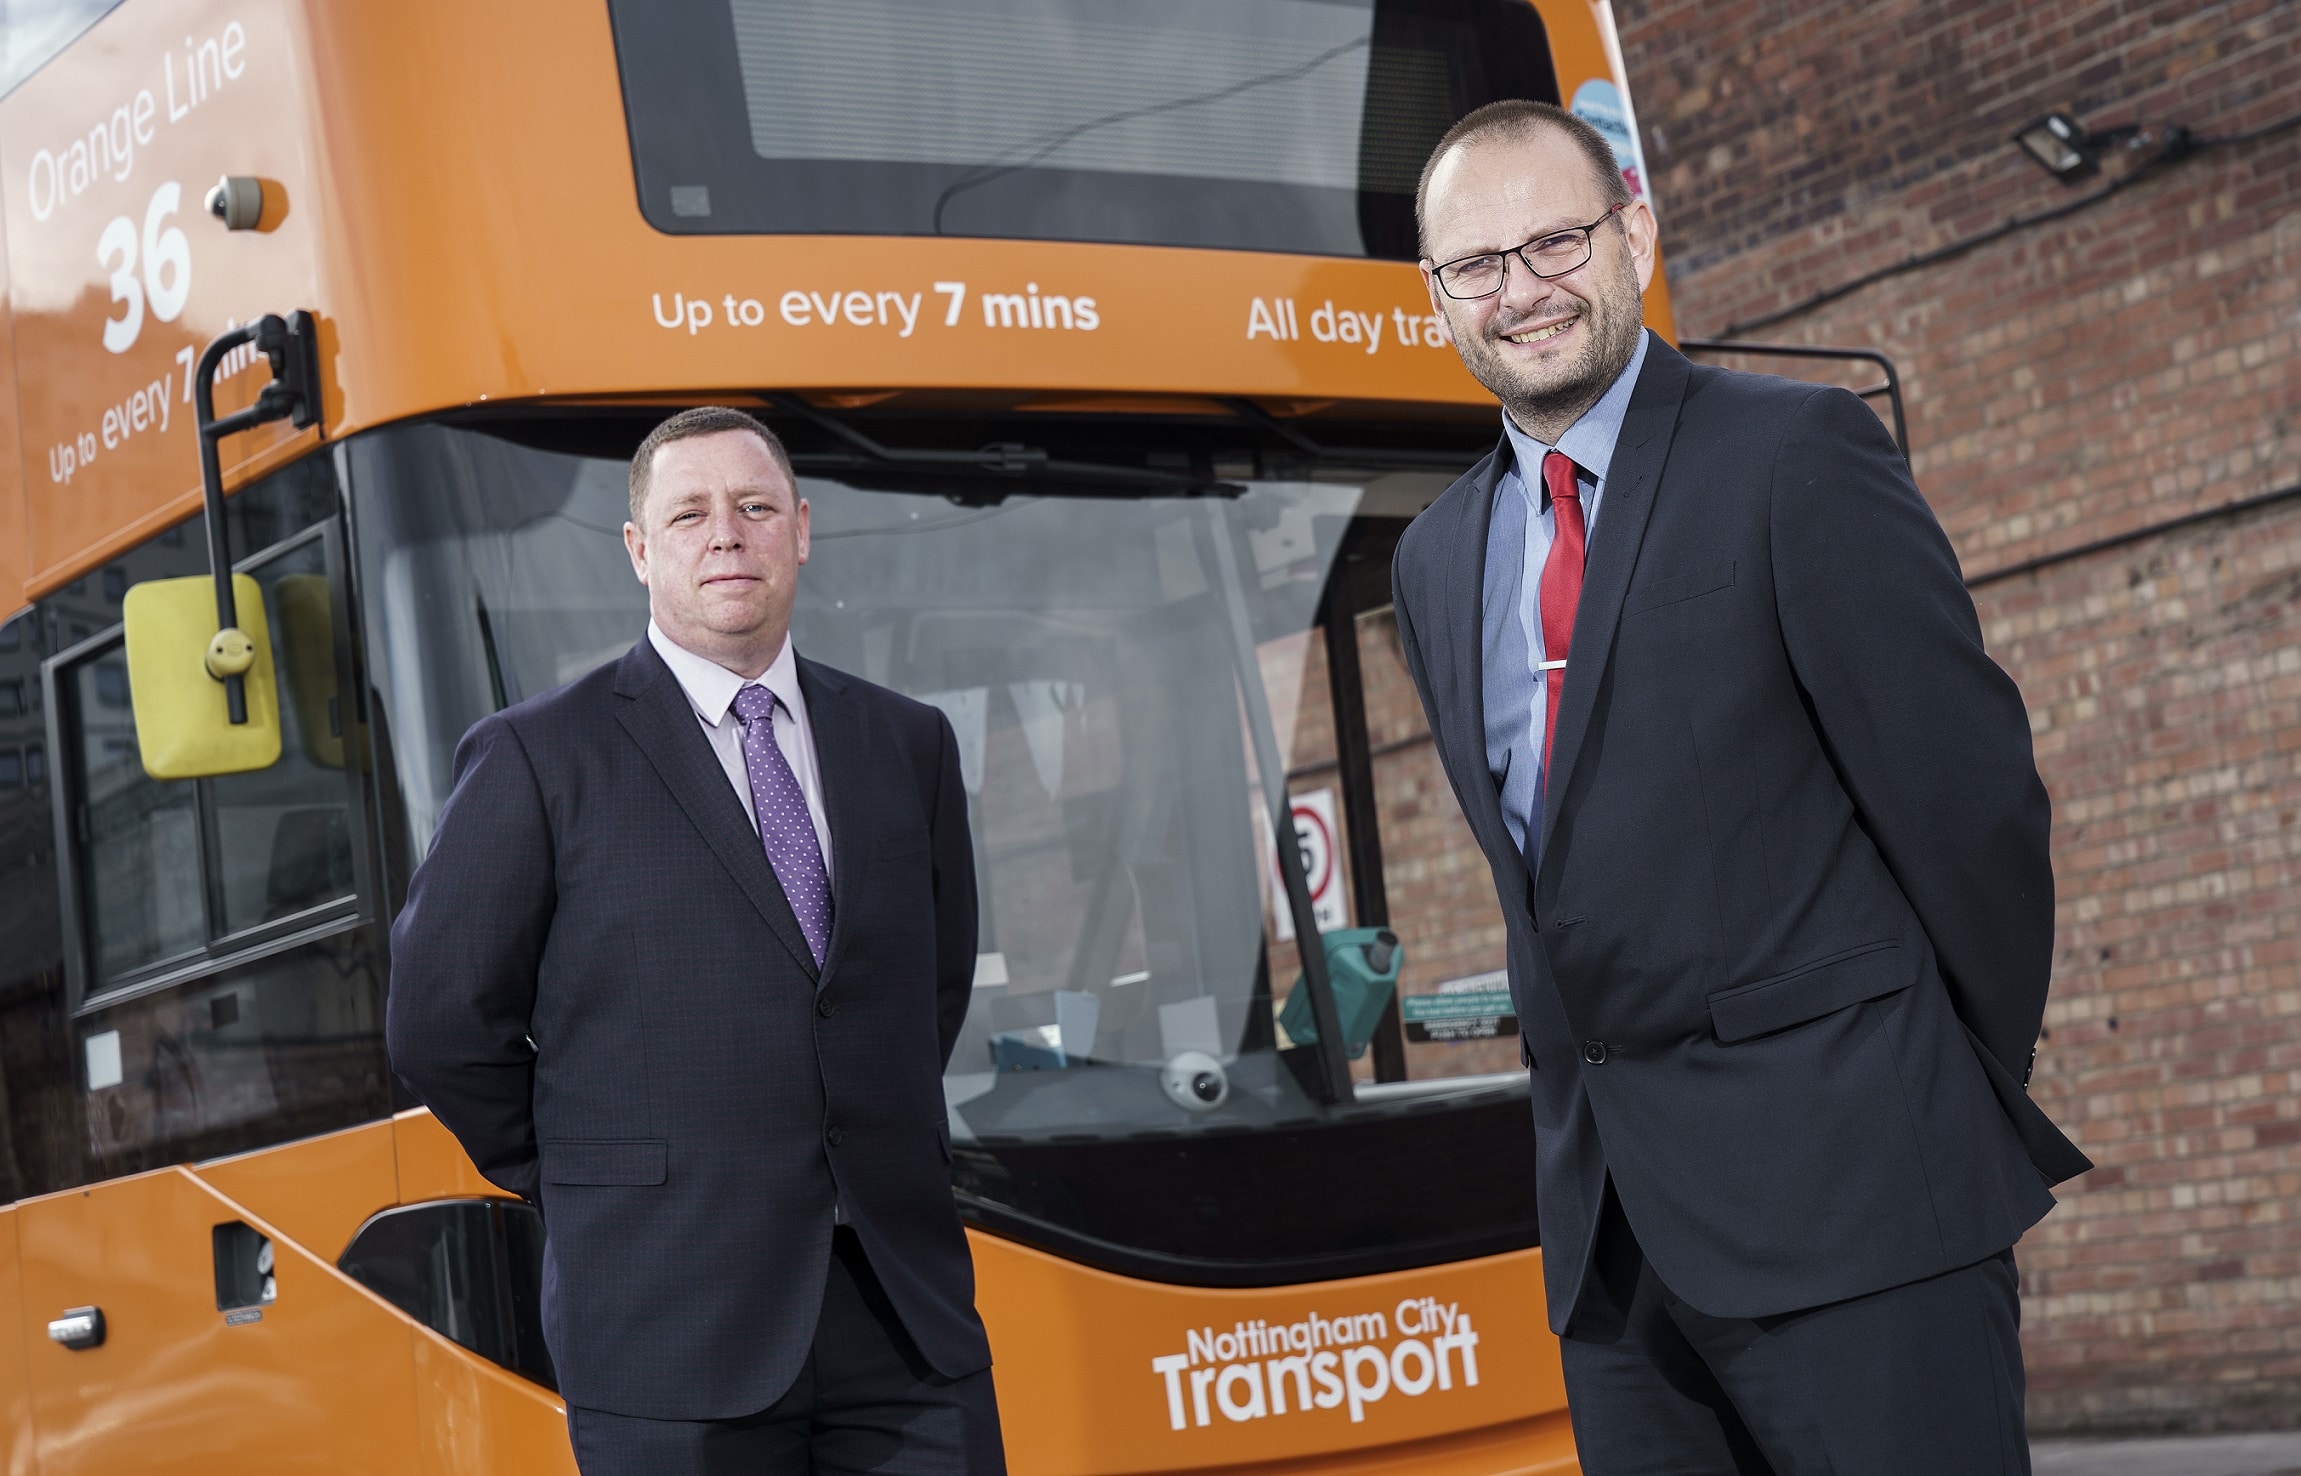 Changes to Nottingham City Transport management team announced